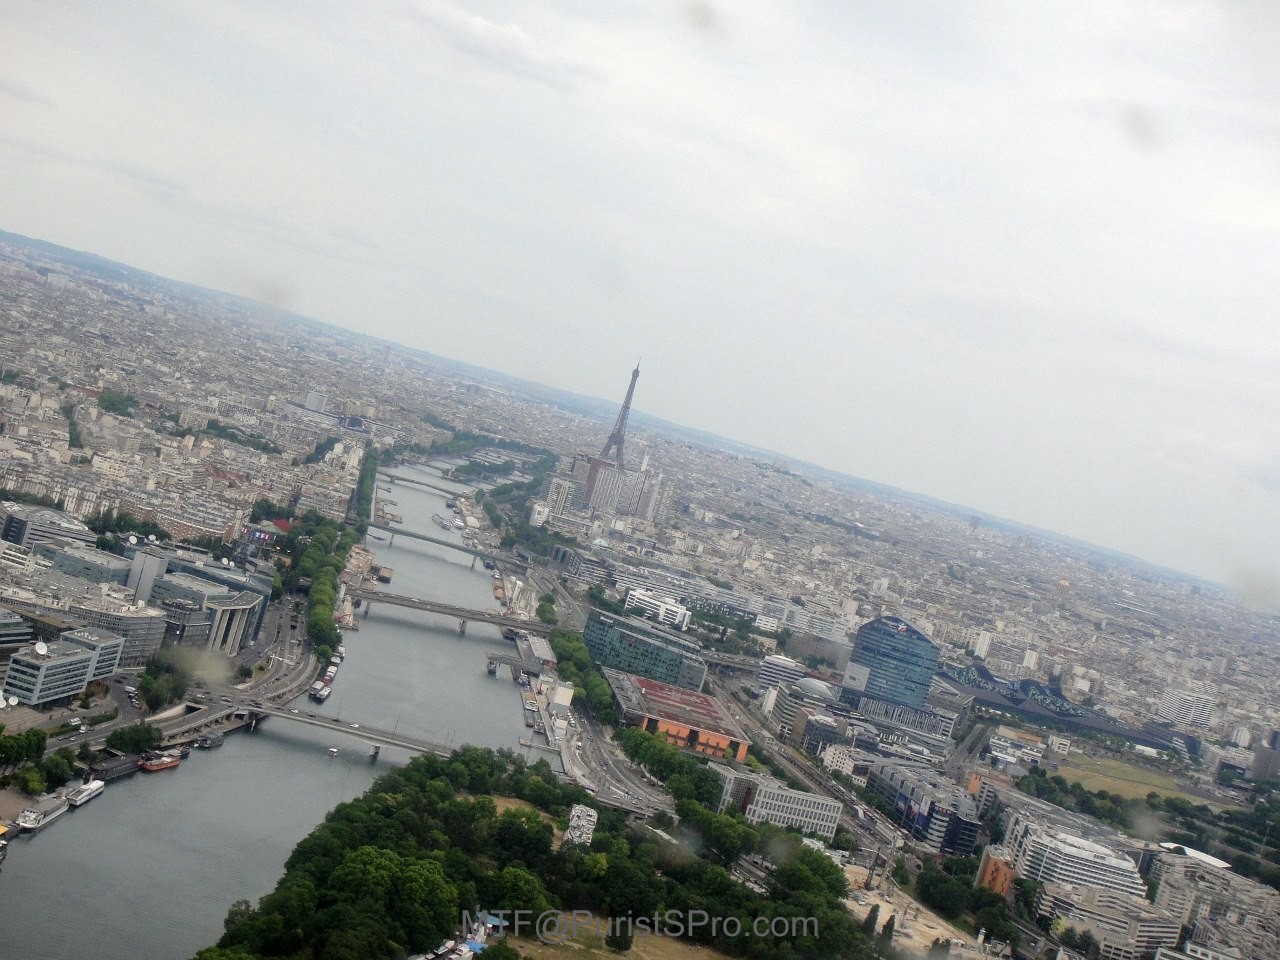 River Seine and Tour Eiffel on finals to landing pad